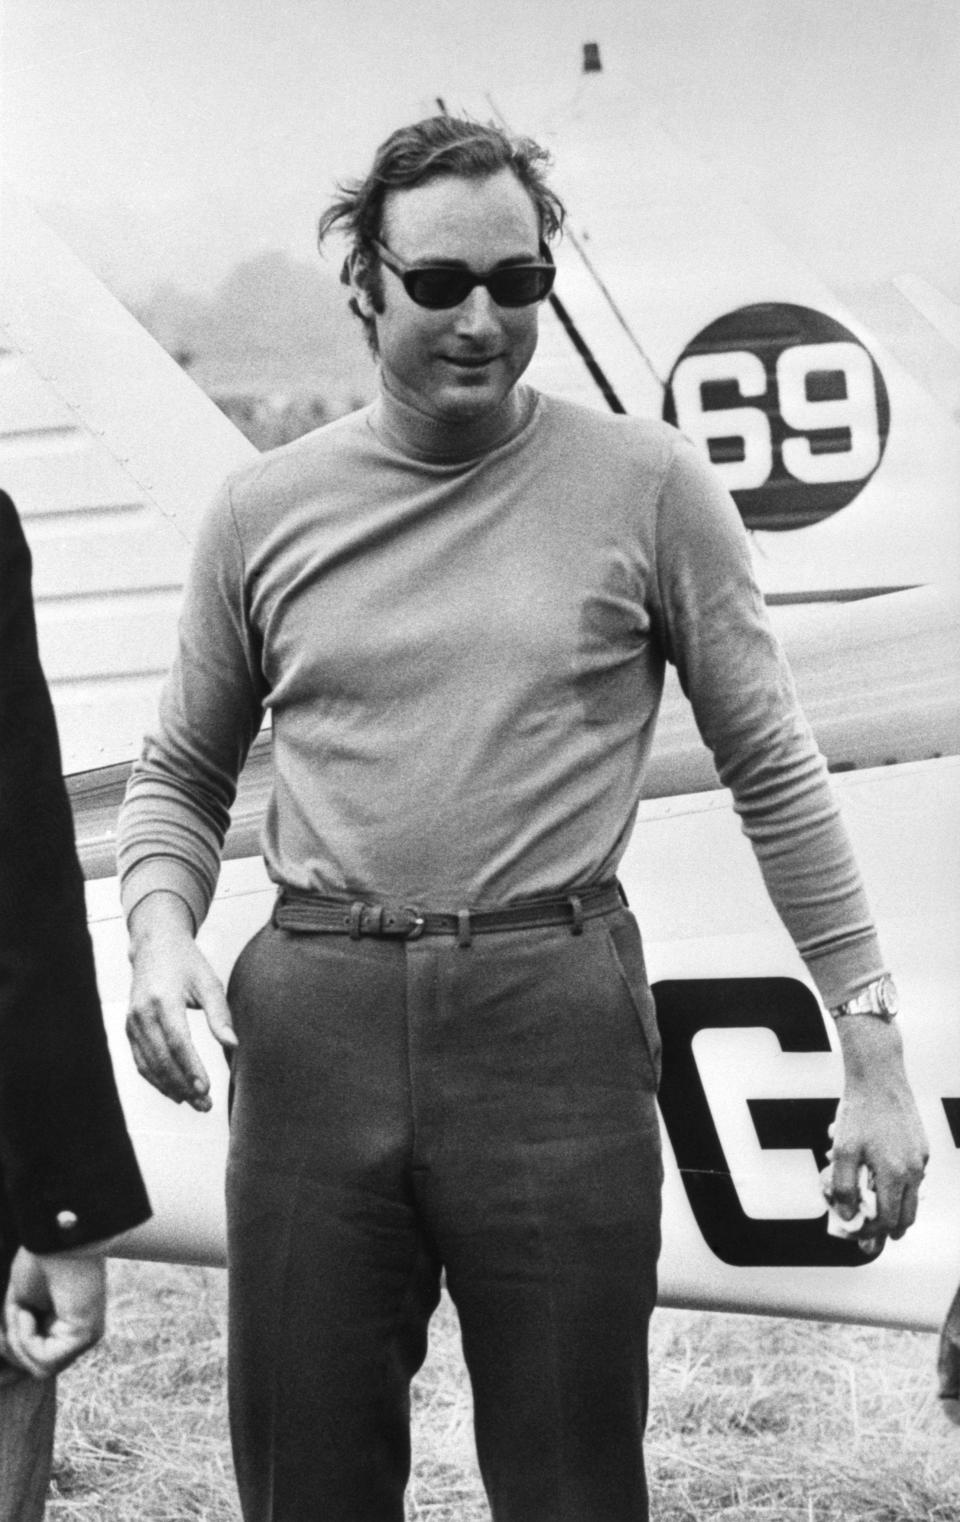 Prince William of Gloucester shortly before competing in the Goodyear Air Race which was to lead to his death after crashing in the event.   (Photo by PA Images via Getty Images)